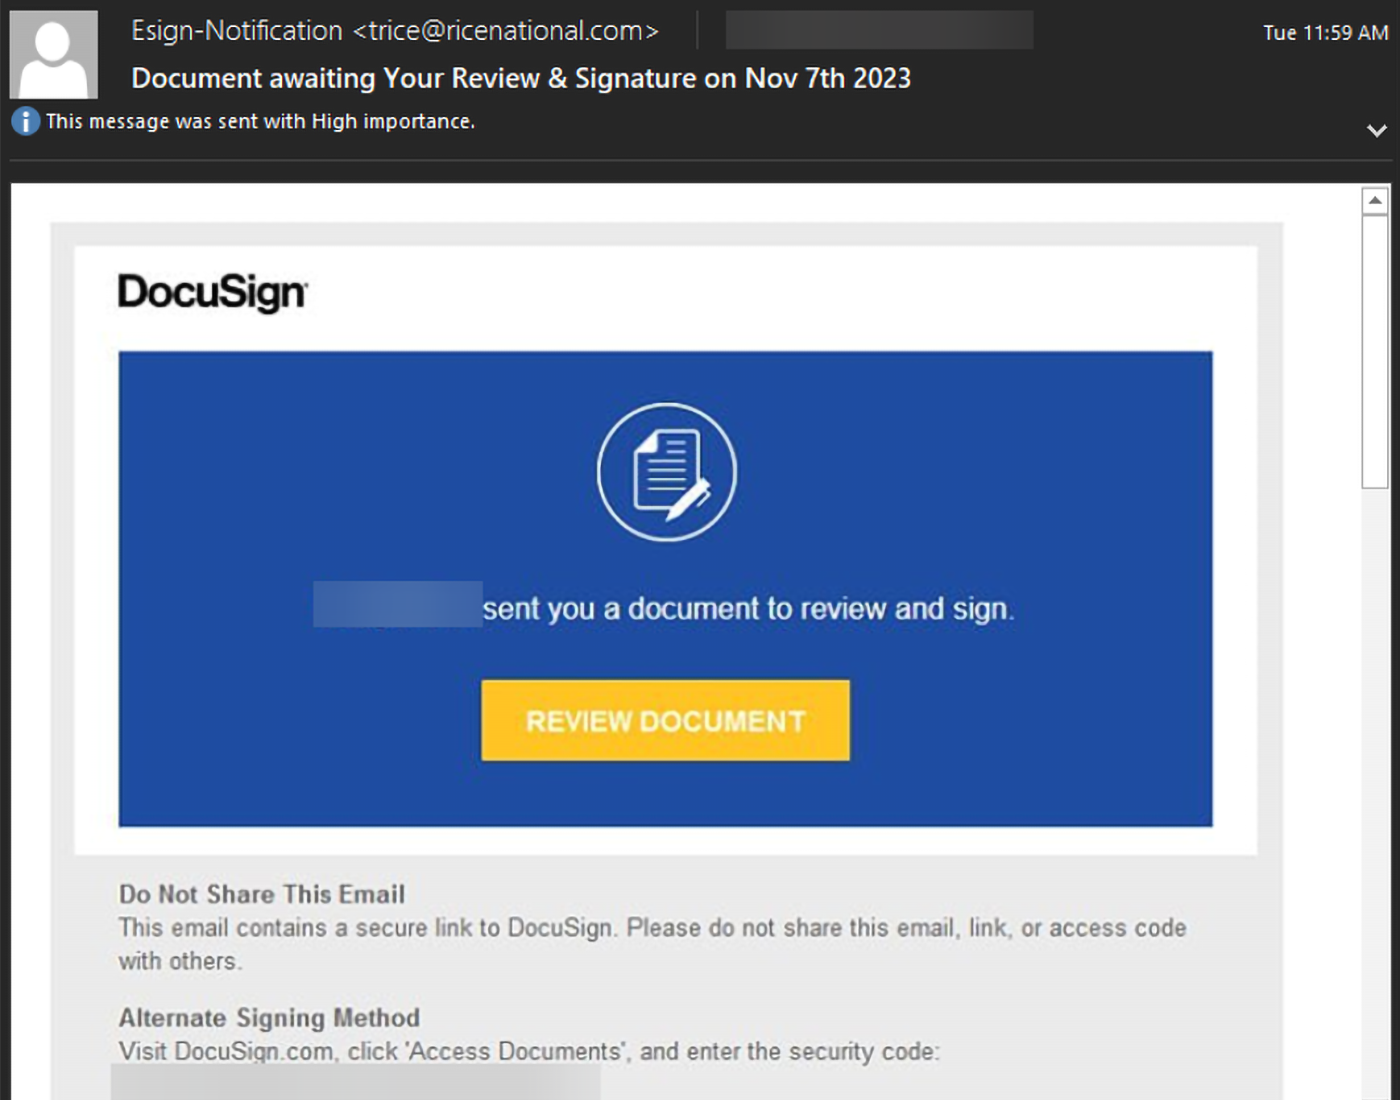 Cutaway detail of a phishing email with example of typical urgency language.